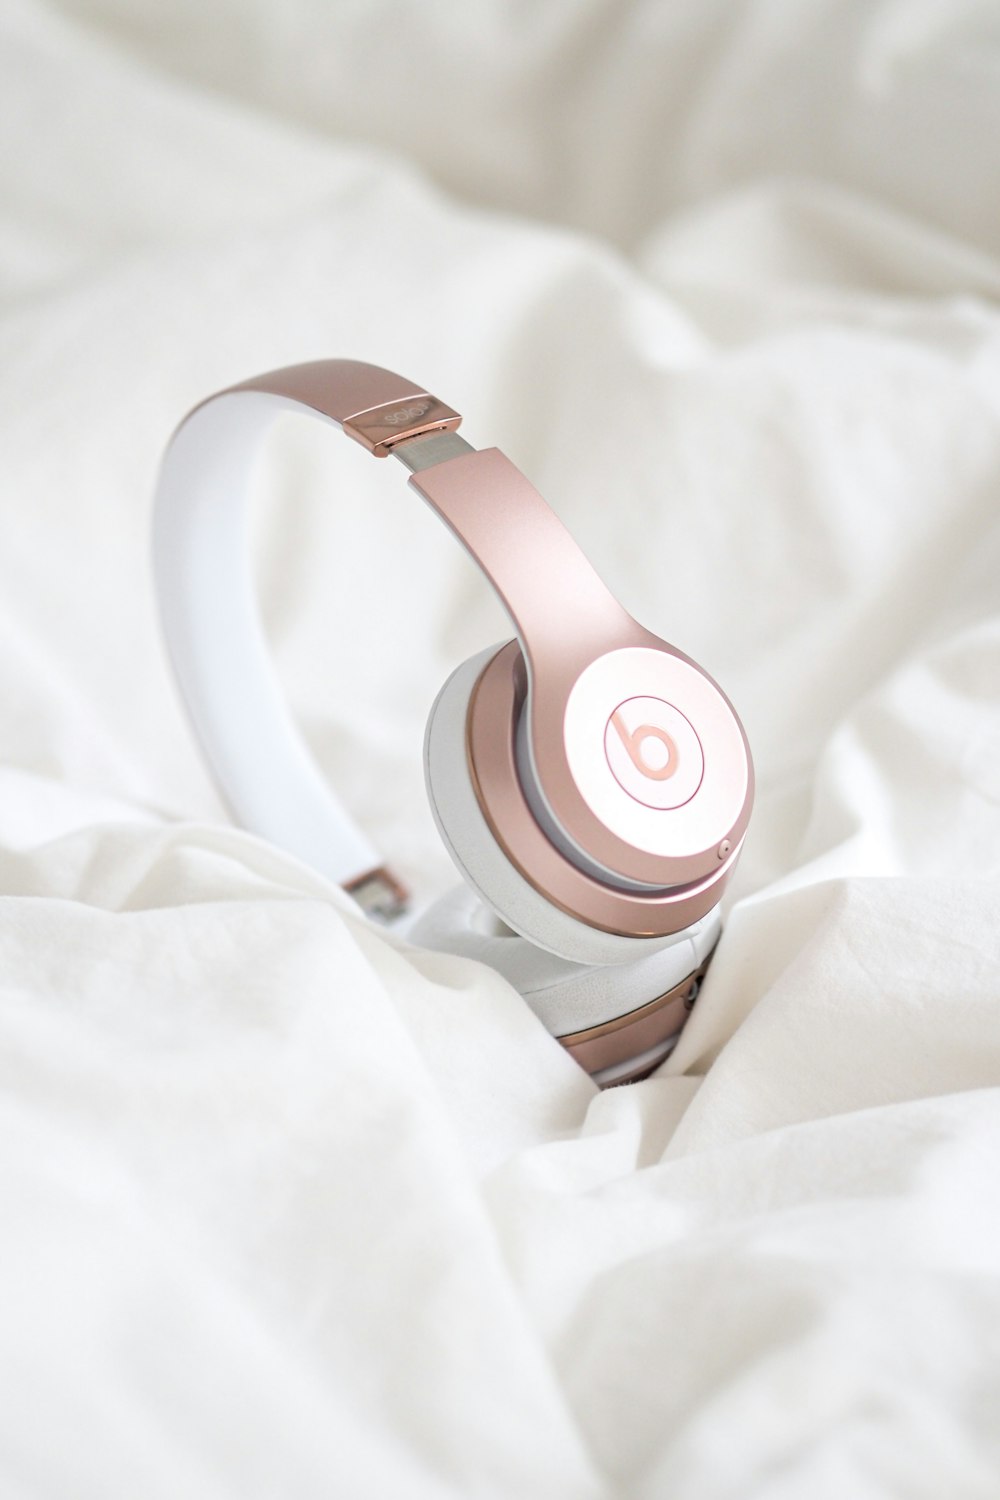 White beats by dr dre wireless headphones on white textile photo – Free  Brown Image on Unsplash